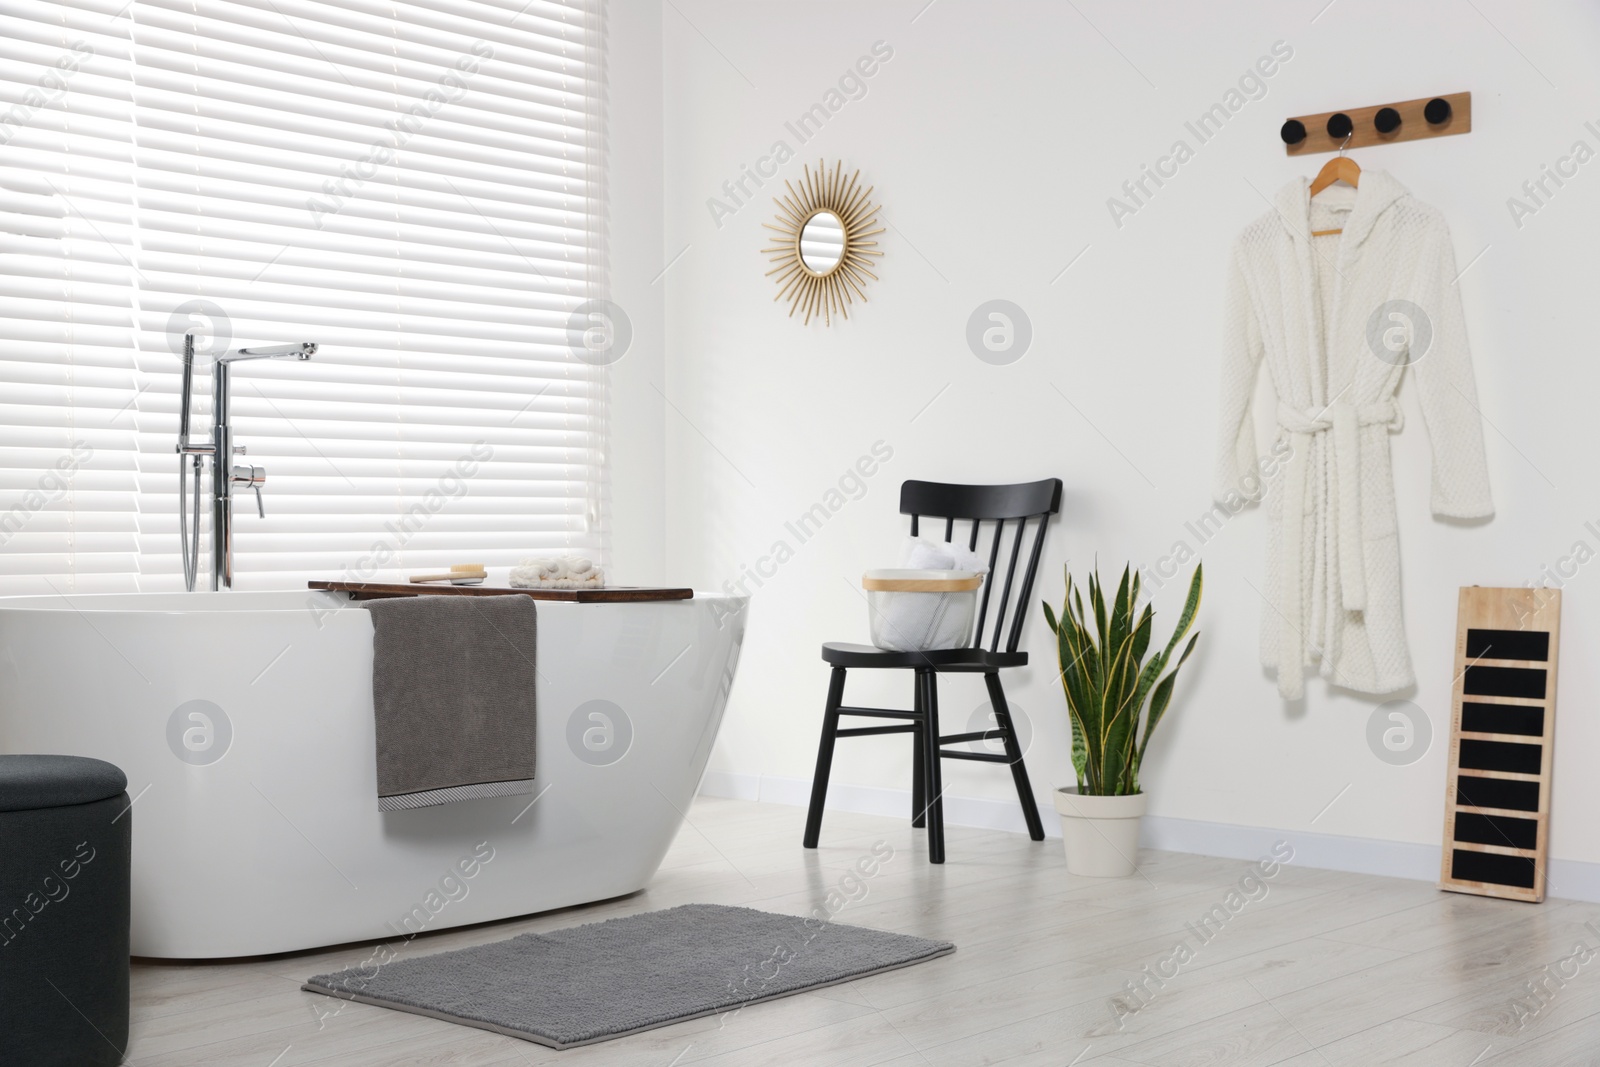 Photo of Stylish bathroom interior with ceramic tub, terry towels and houseplant